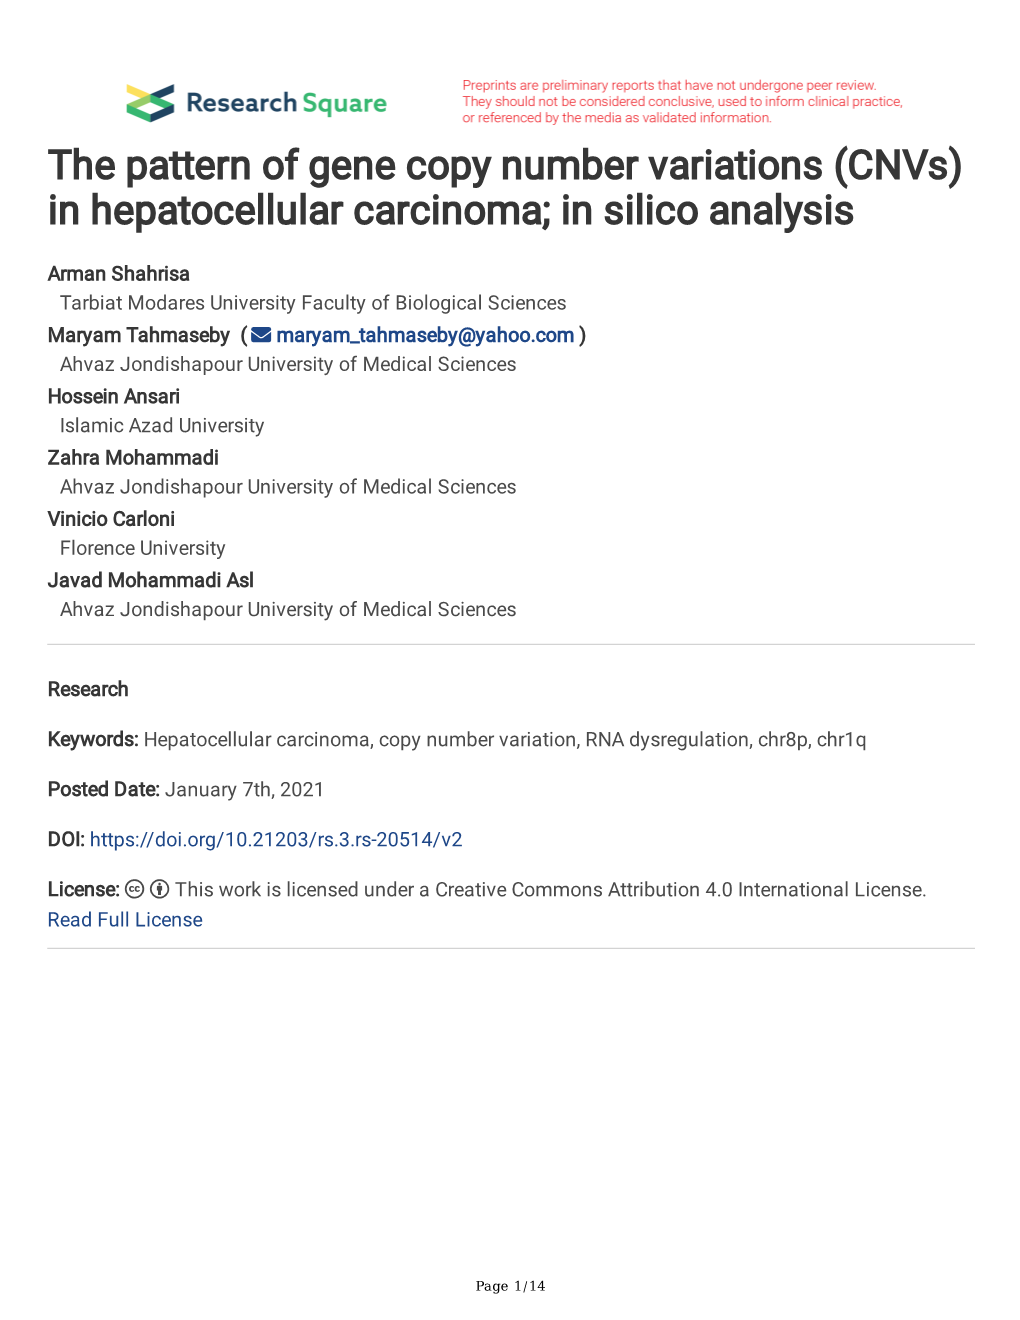 (Cnvs) in Hepatocellular Carcinoma; in Silico Analysis